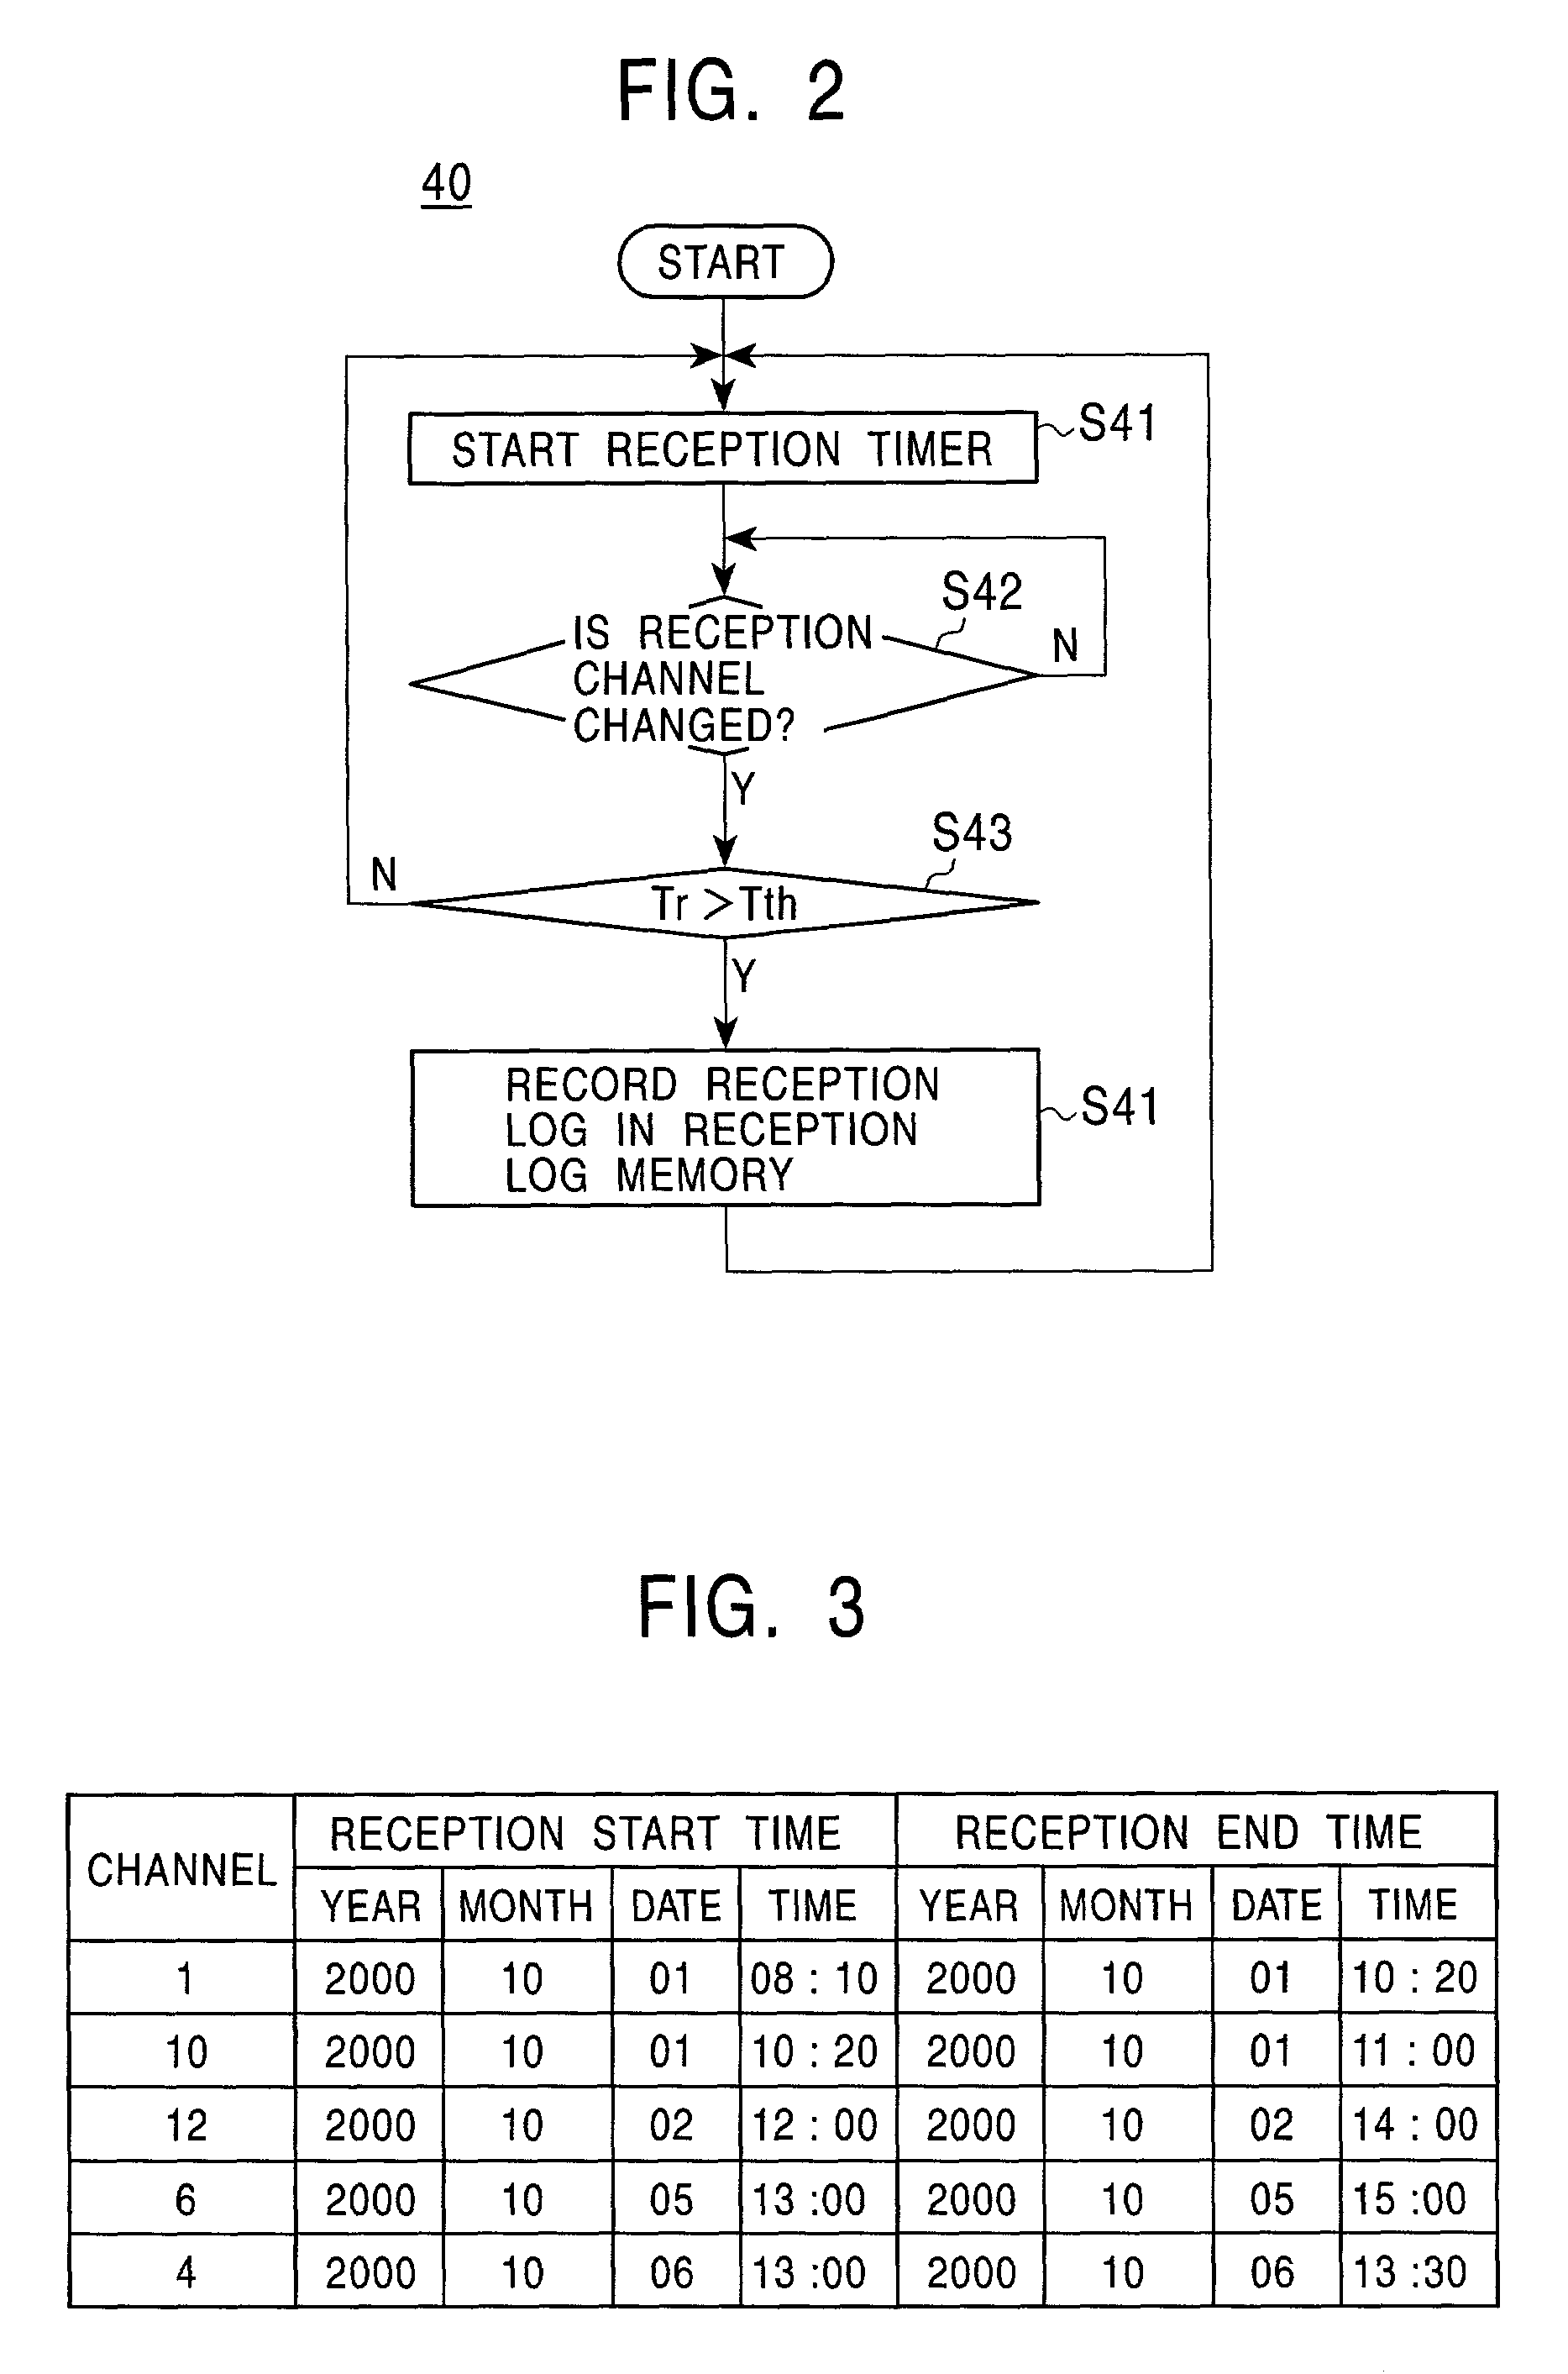 Broadcast receiver and method and apparatus for computing viewing/listening information